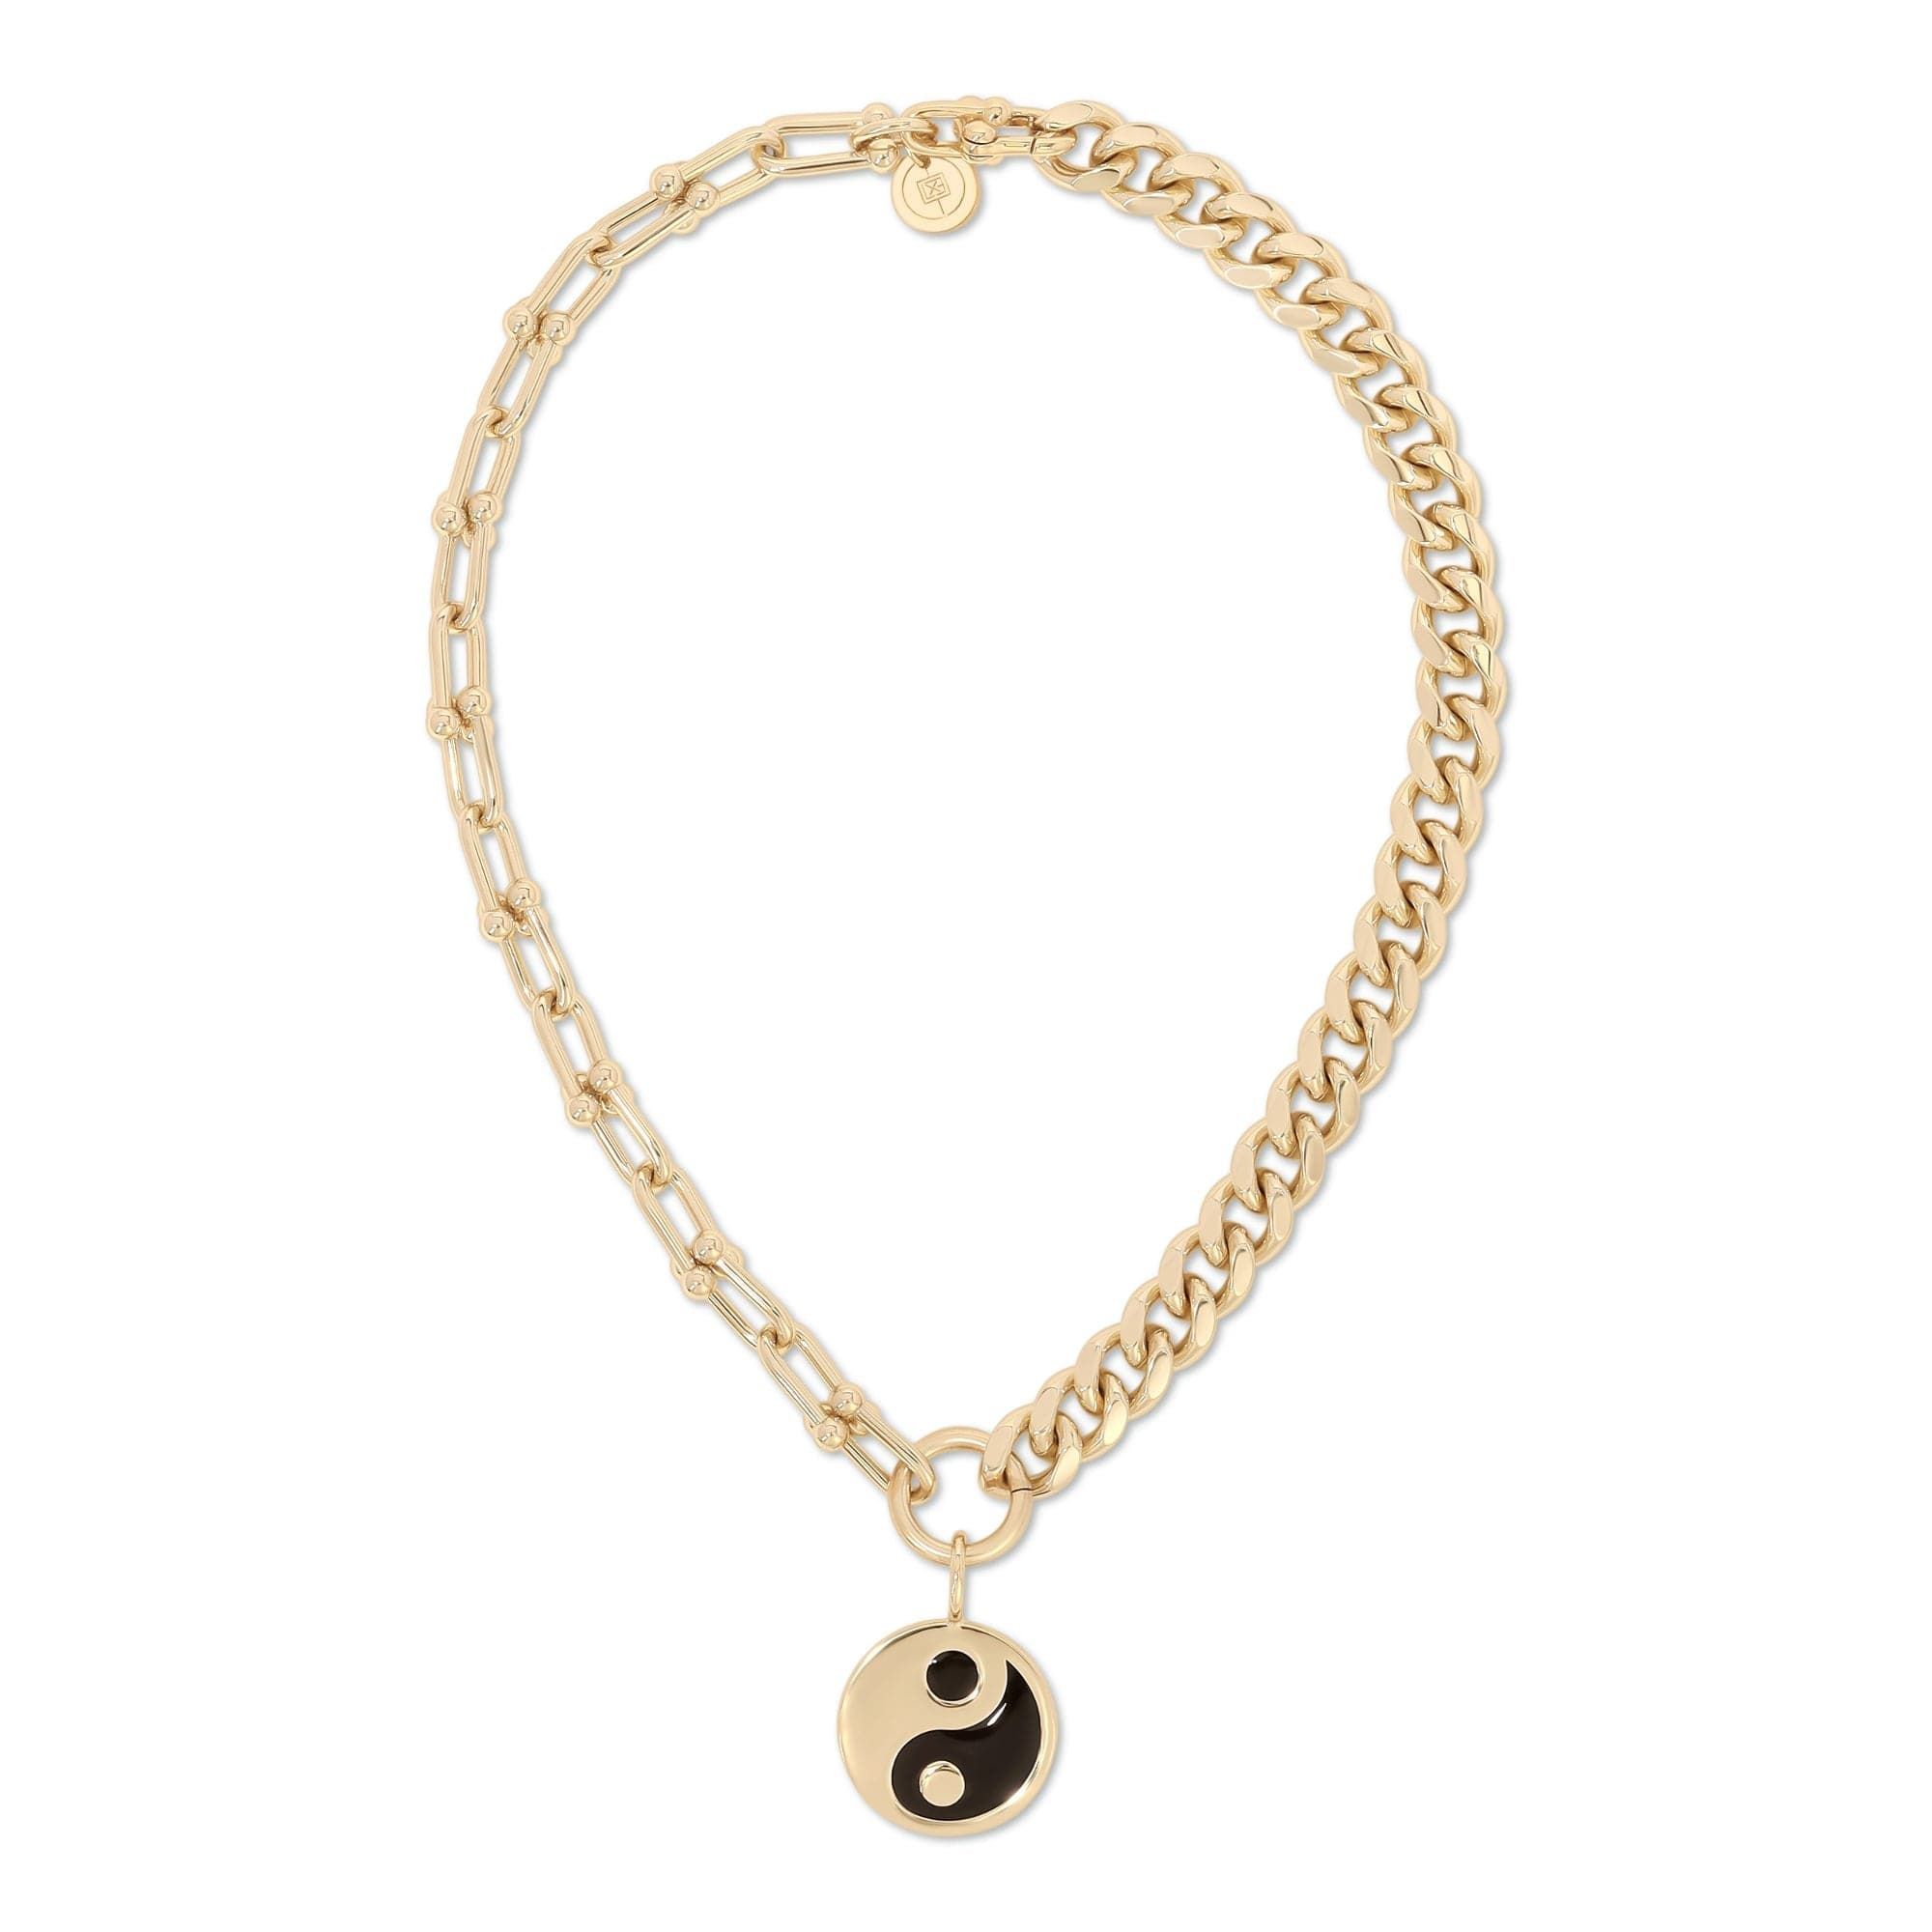 a necklace with a yin symbol on it